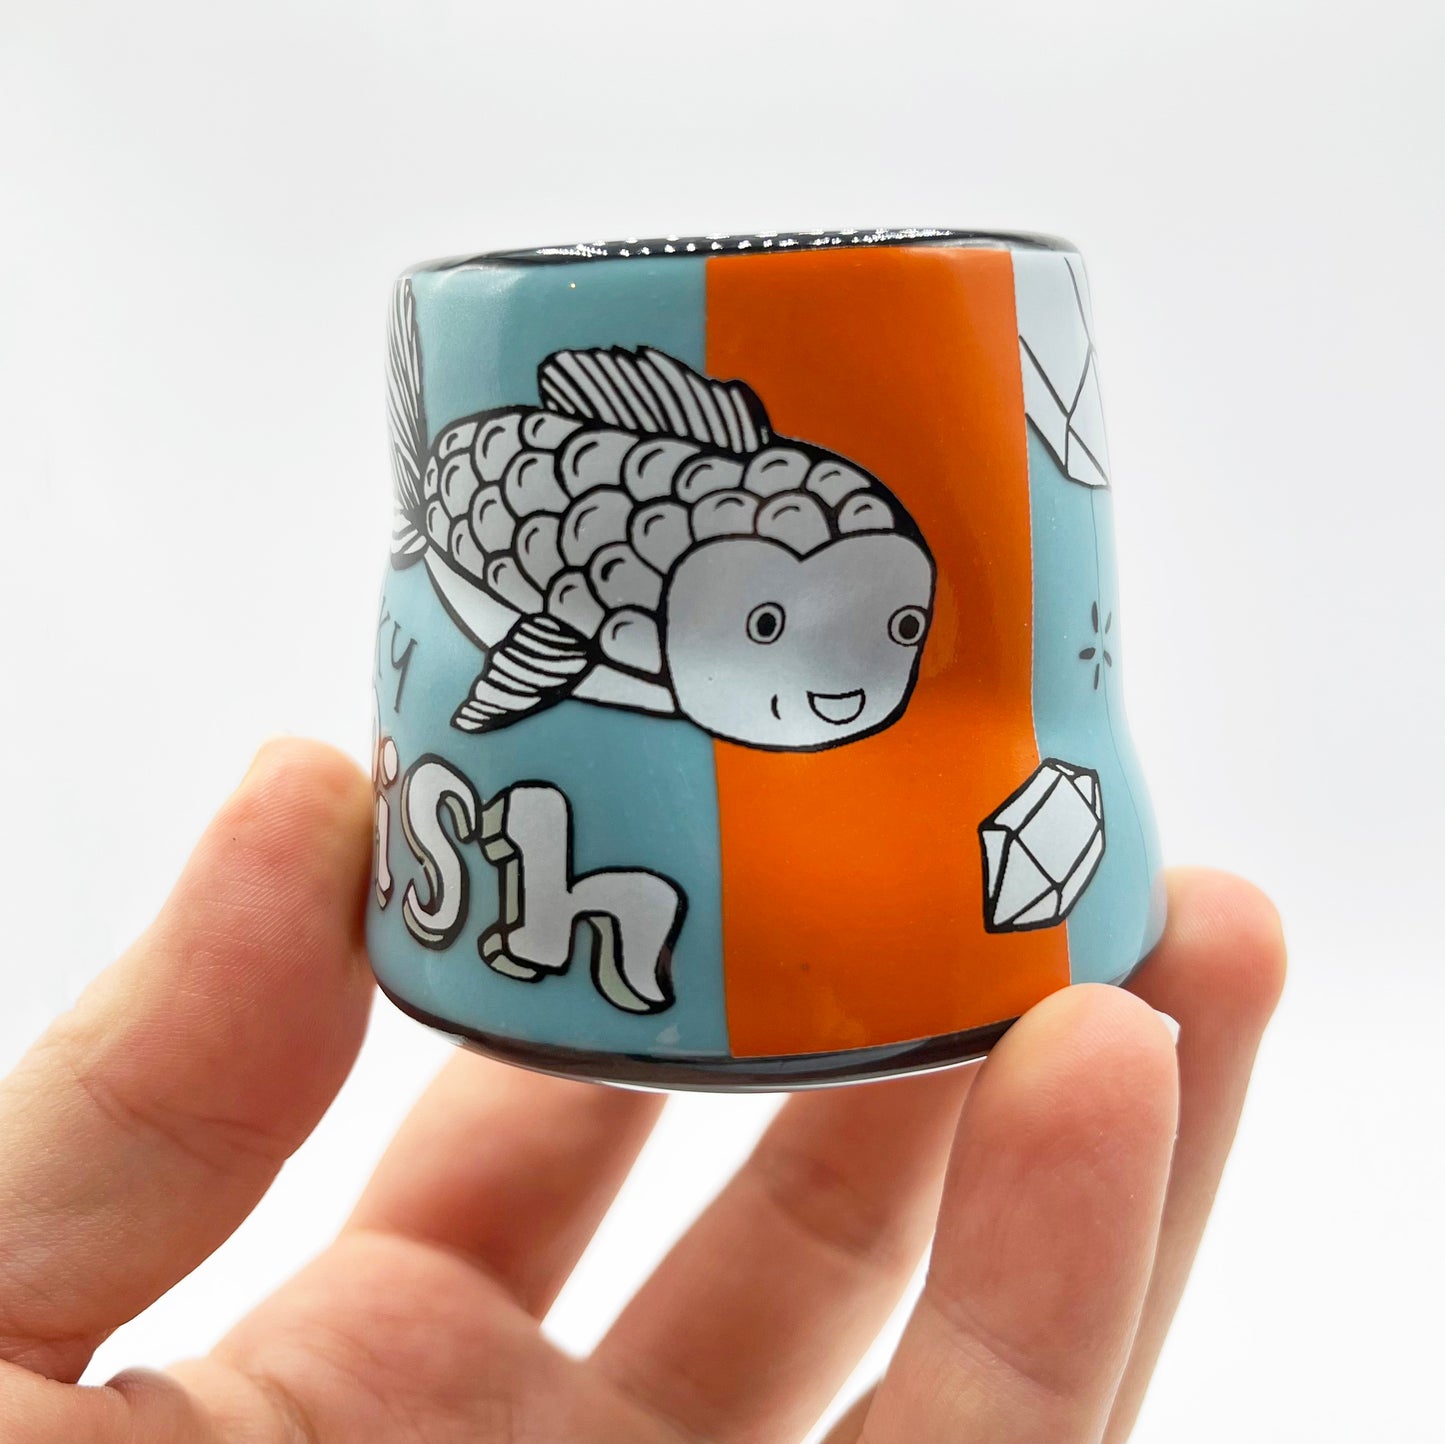 goldfish cup held against a white background